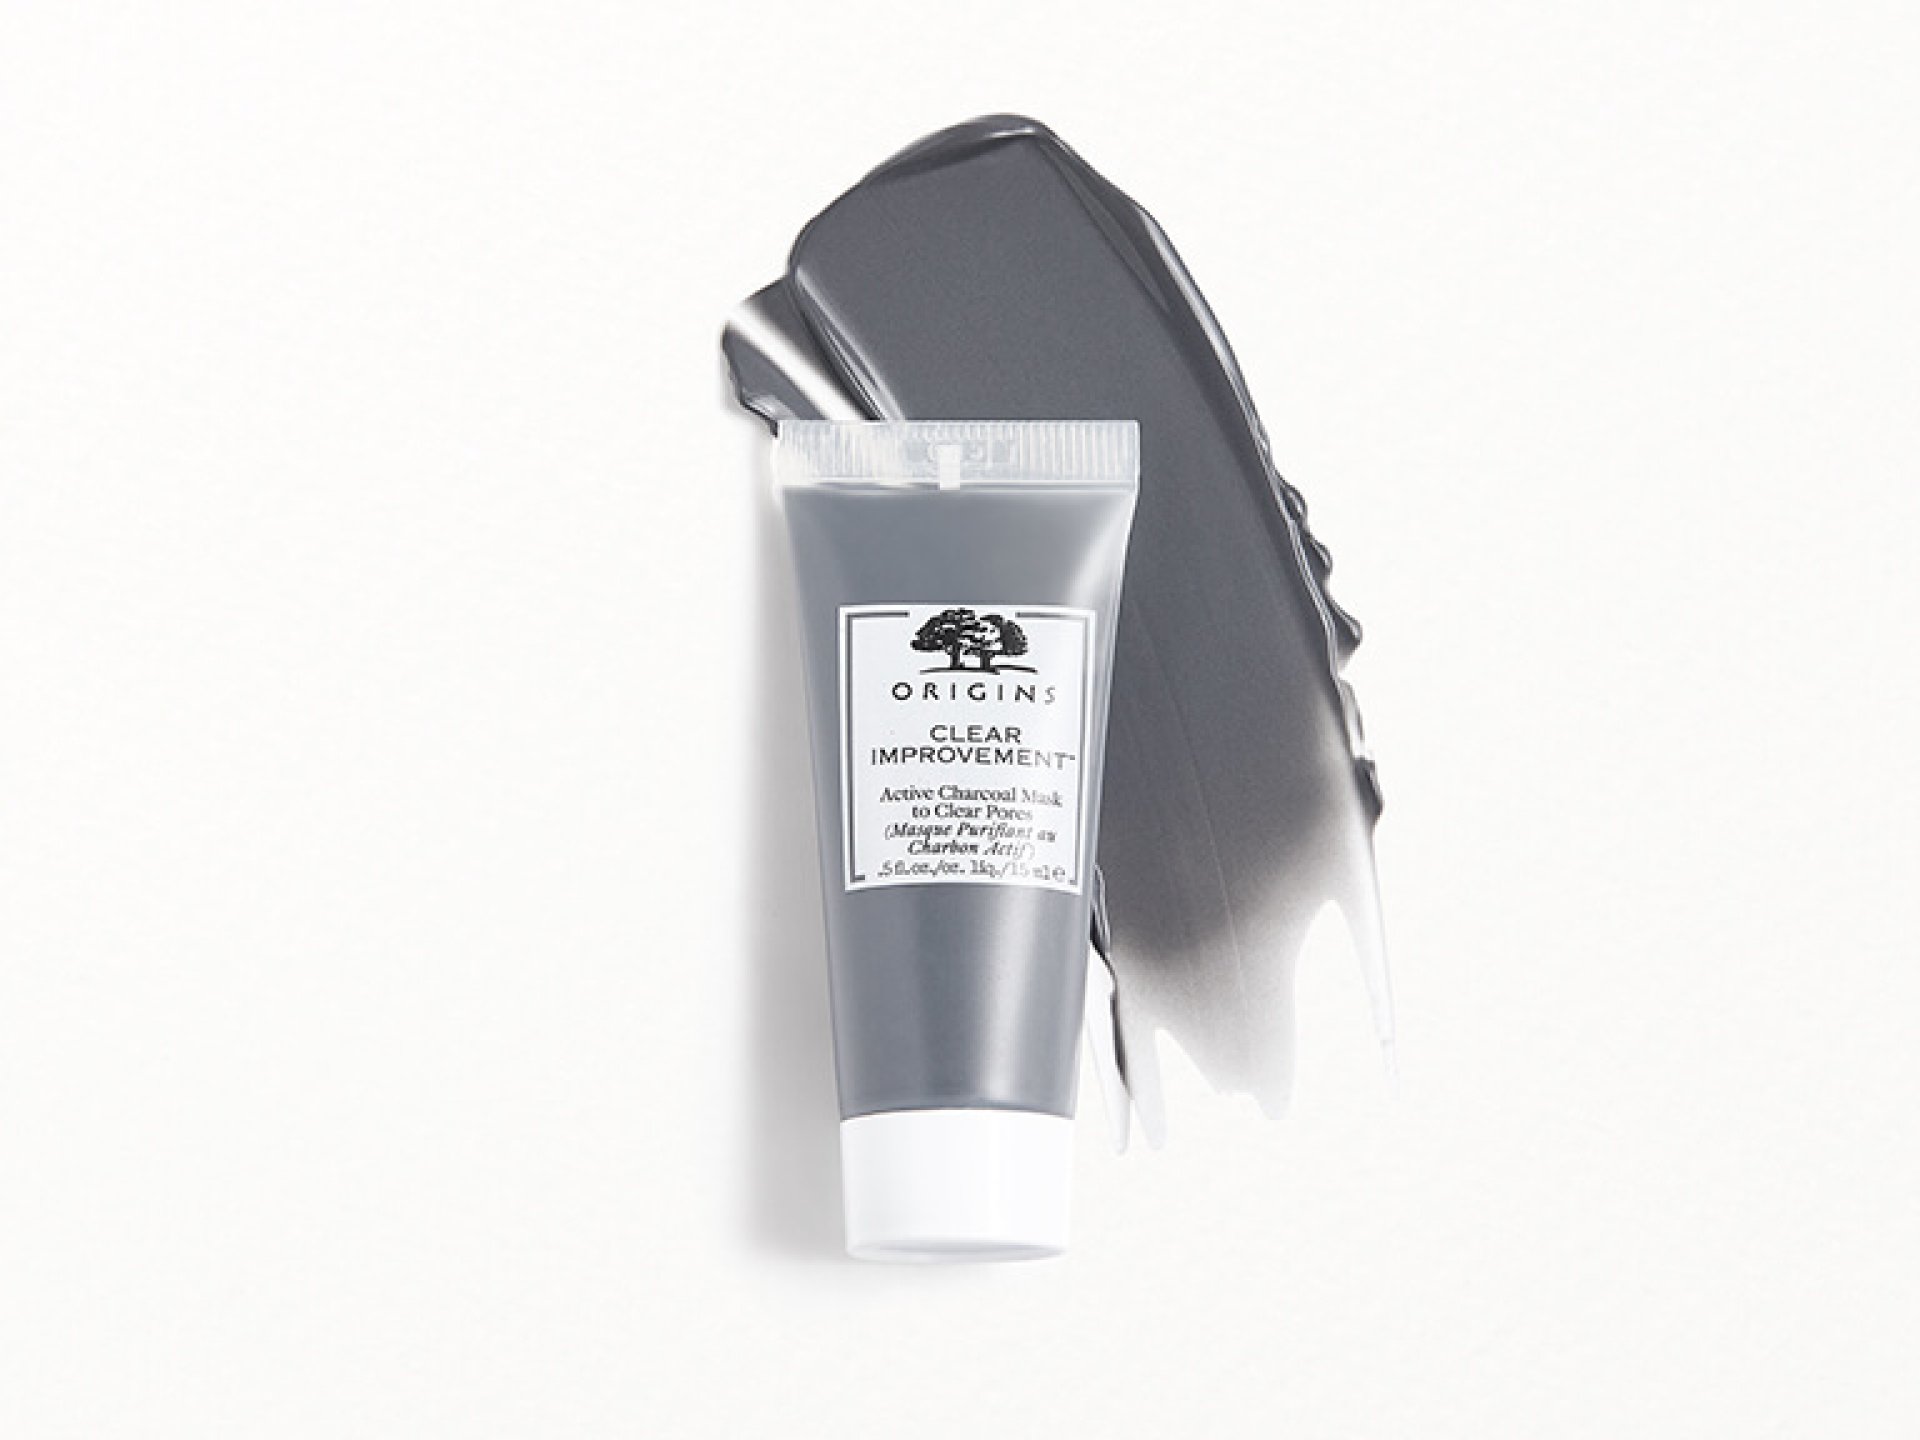 ORIGINS CLEAR IMPROVEMENT™ Active Charcoal Mask To Clear Pores